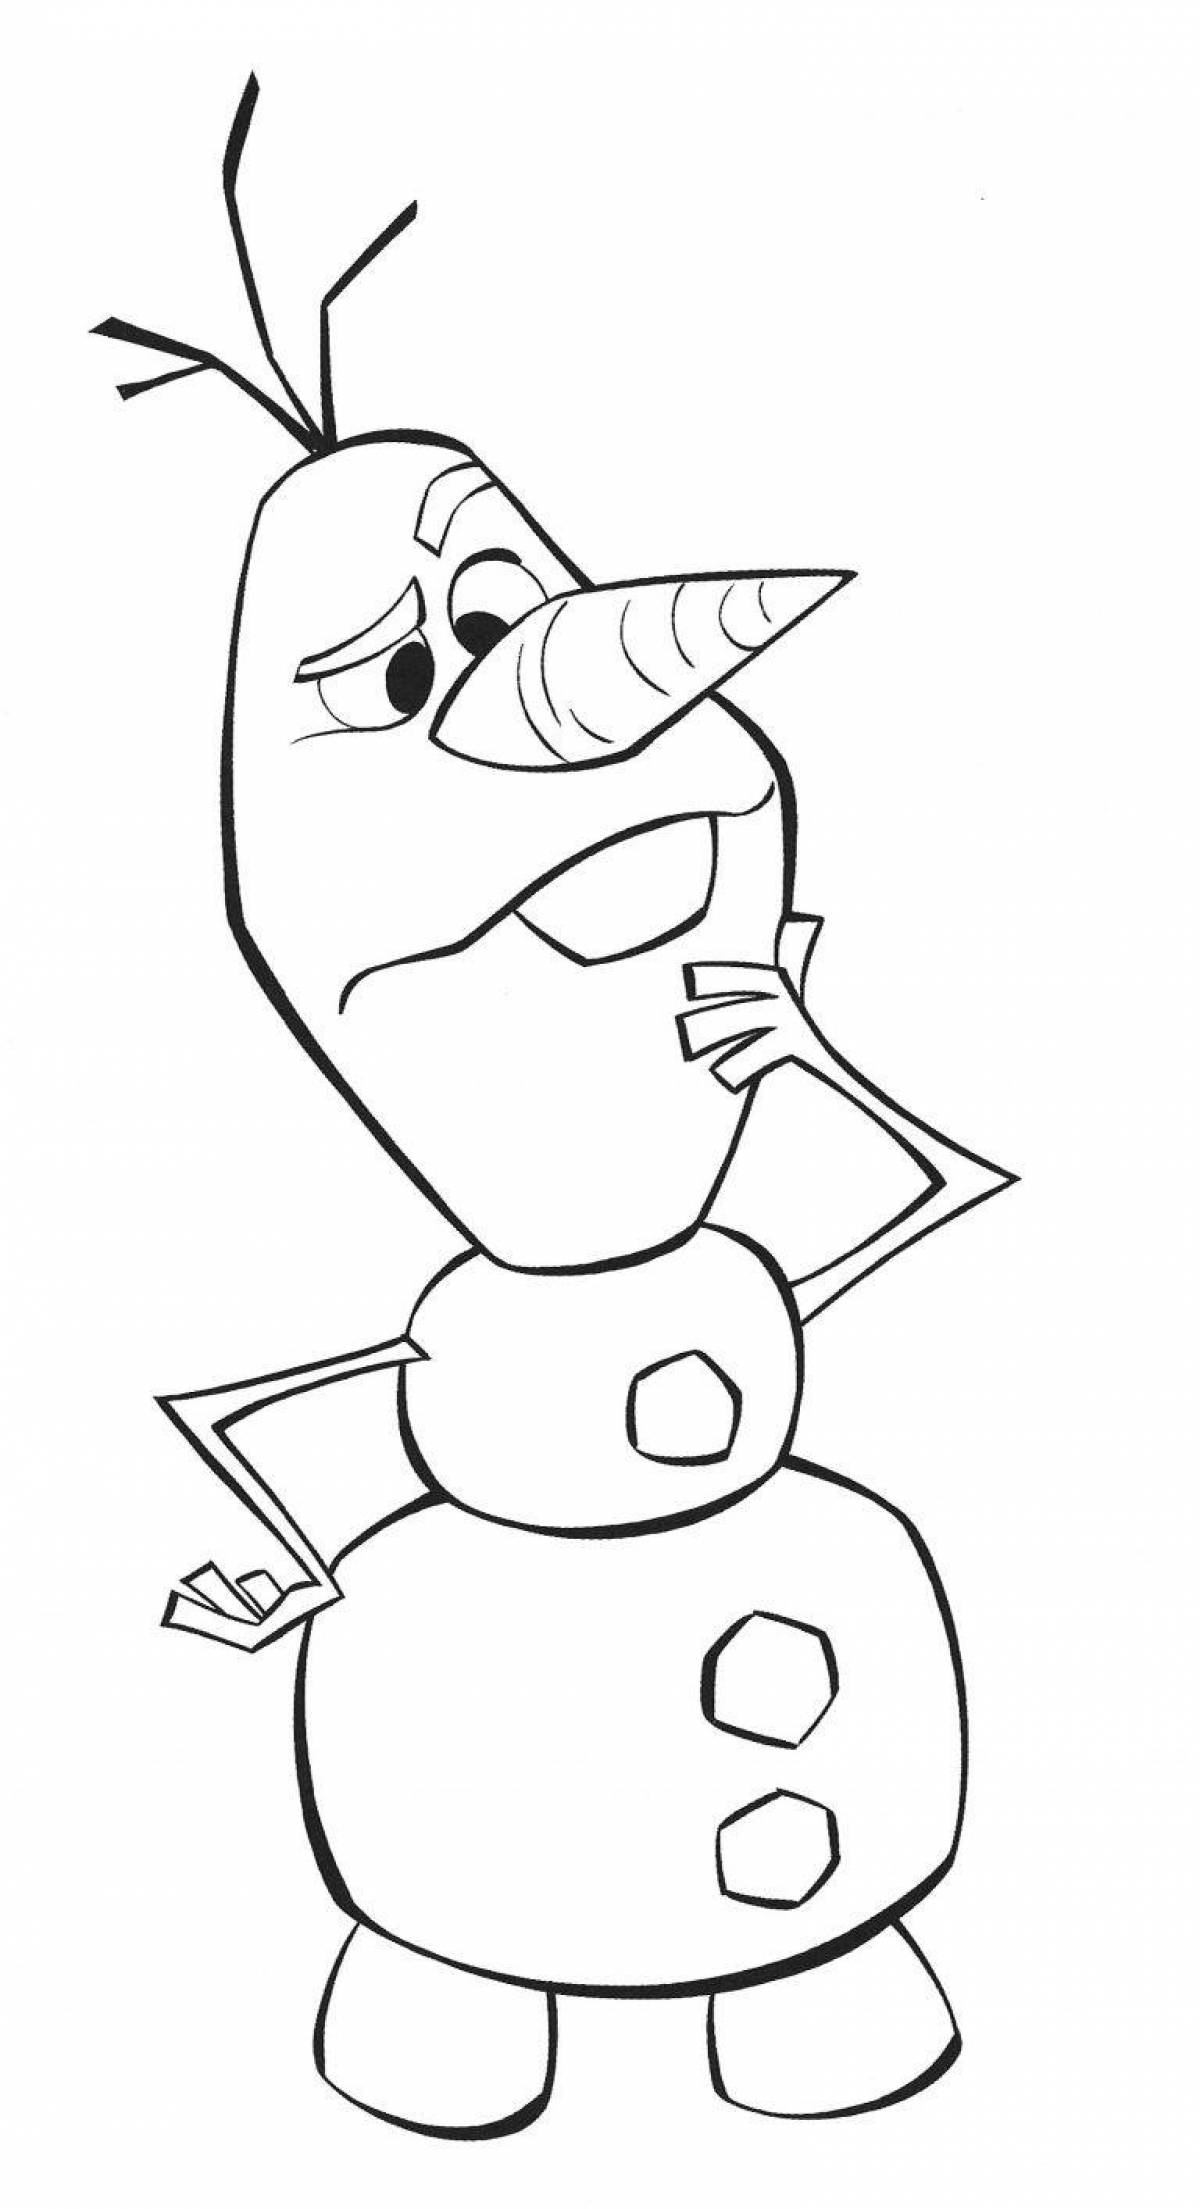 Olaf's exciting coloring book